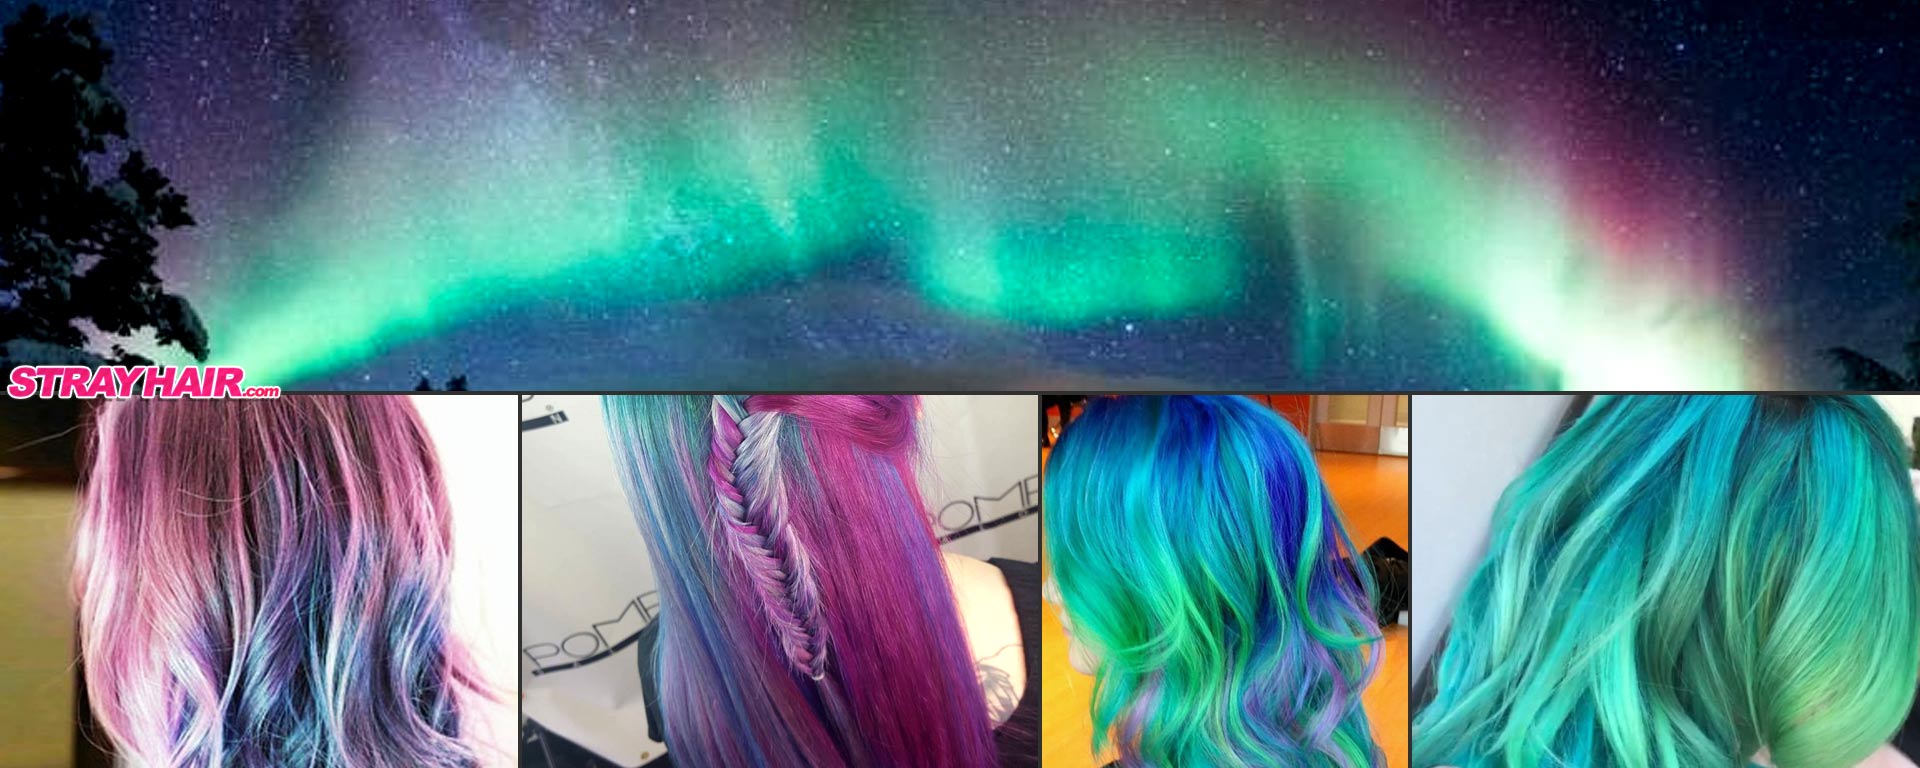 Aurora nothern lights colored hair